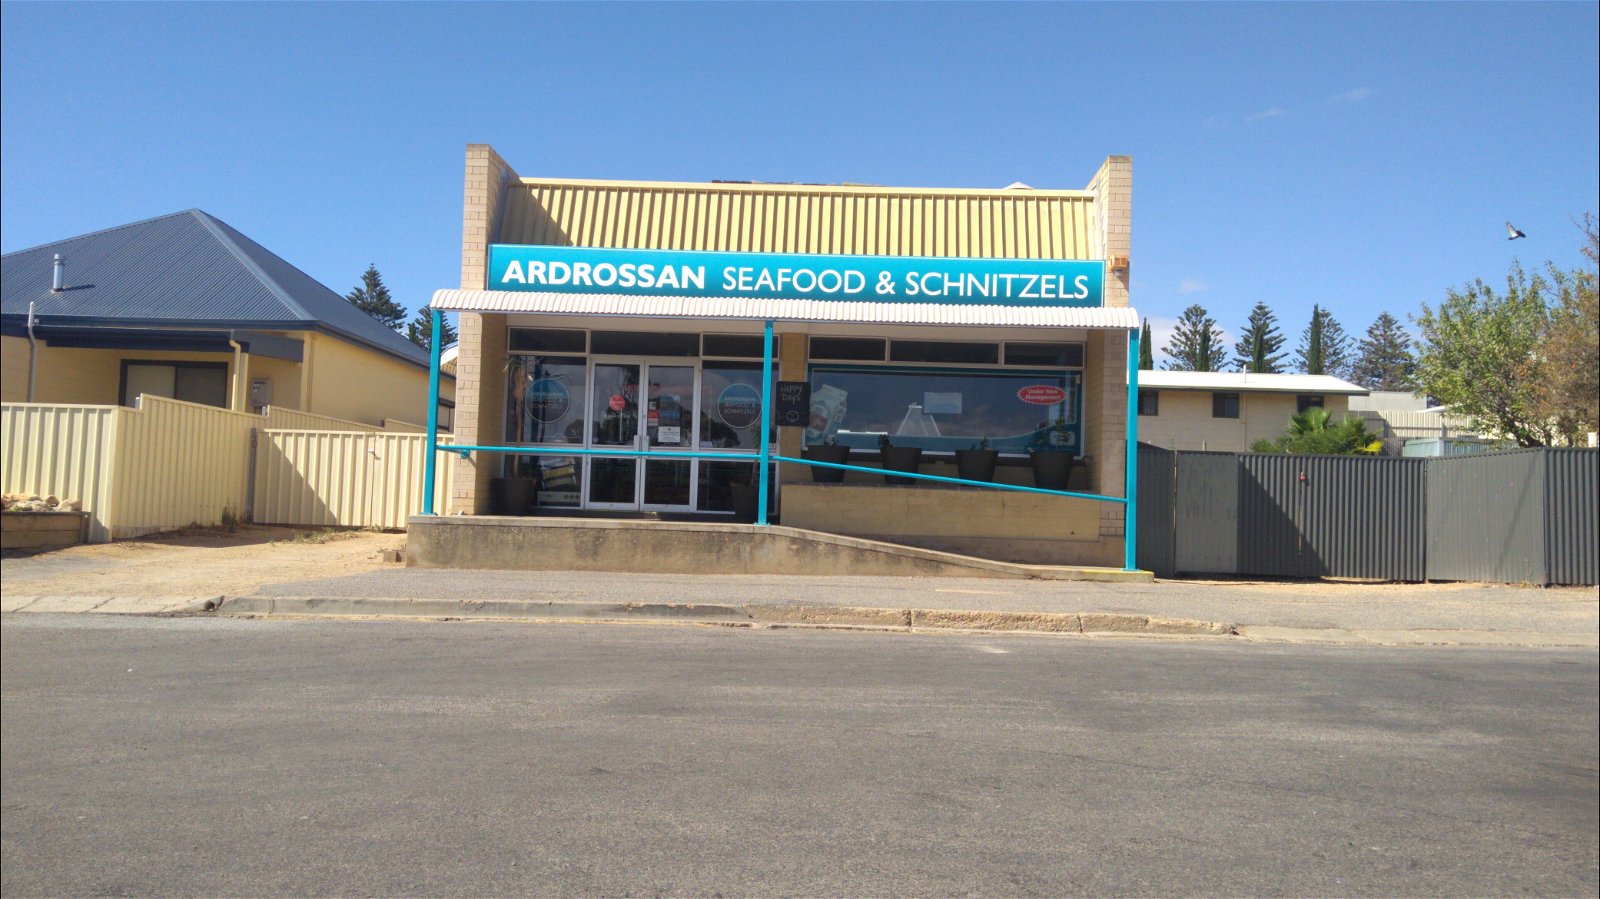 Ardrossan Seafood and Schnitzels - Australia Accommodation